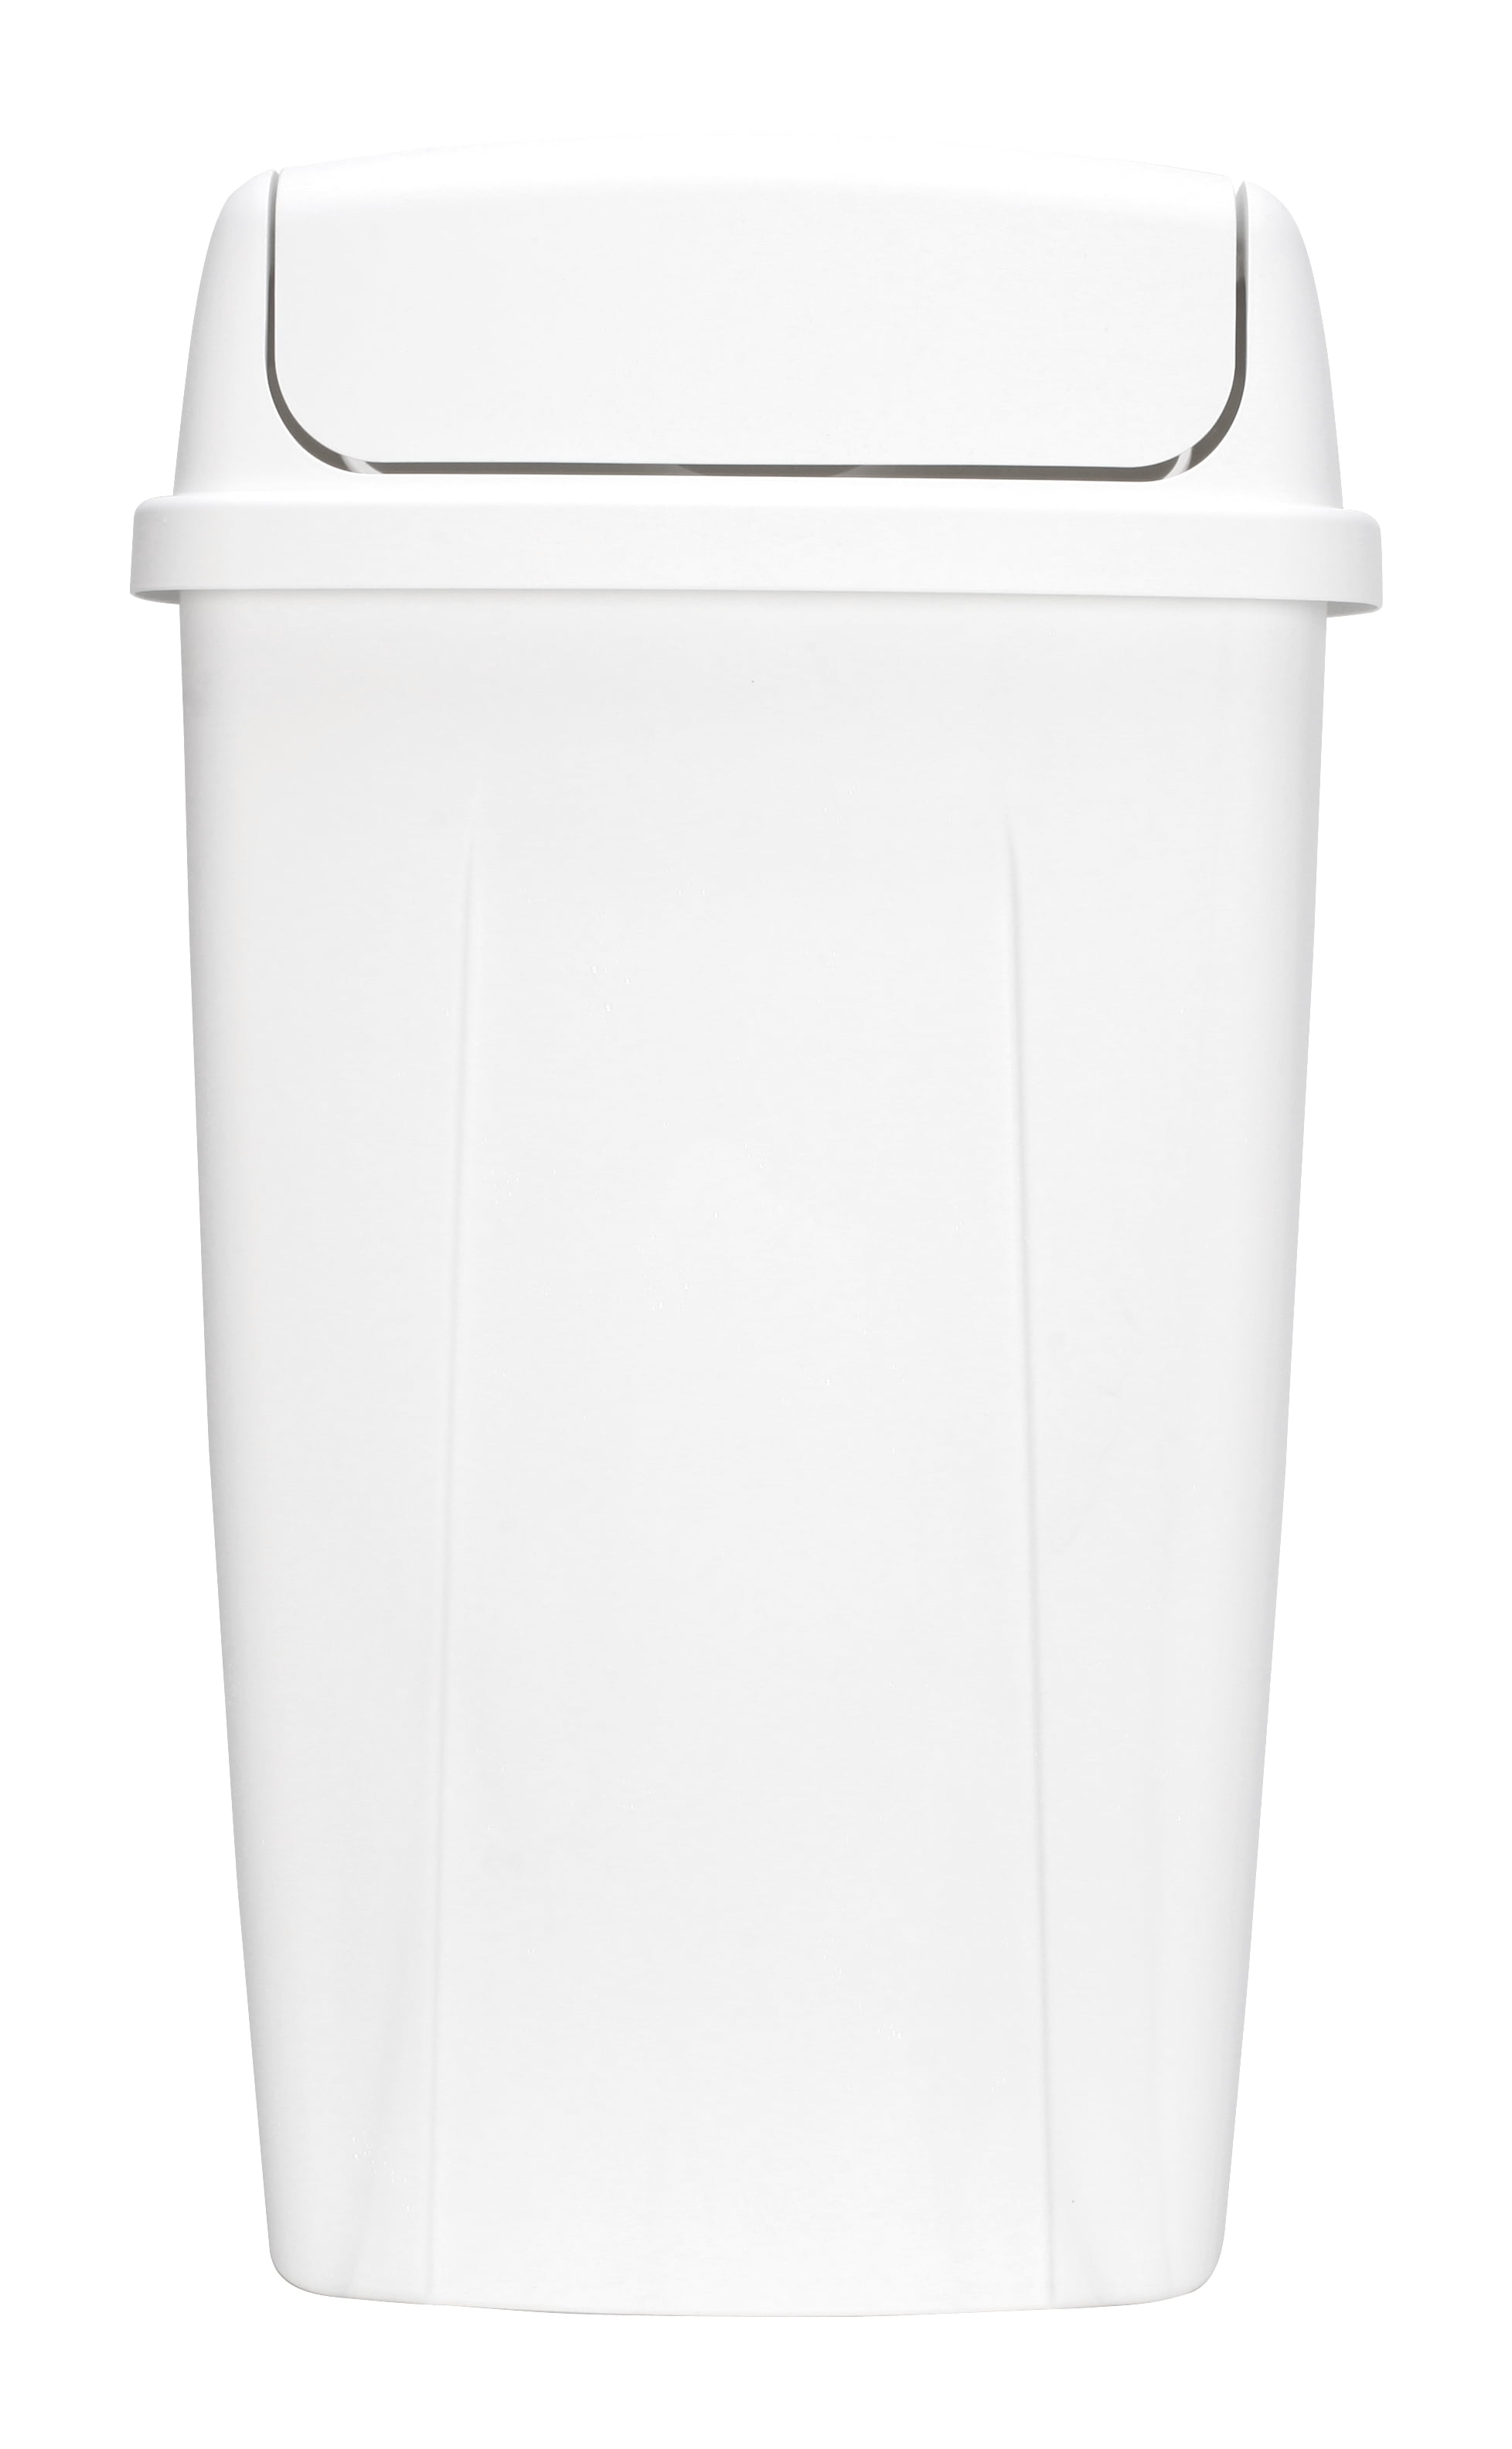 Mainstays 13 gal Plastic Swing Top Lid Kitchen Trash Garbage Can